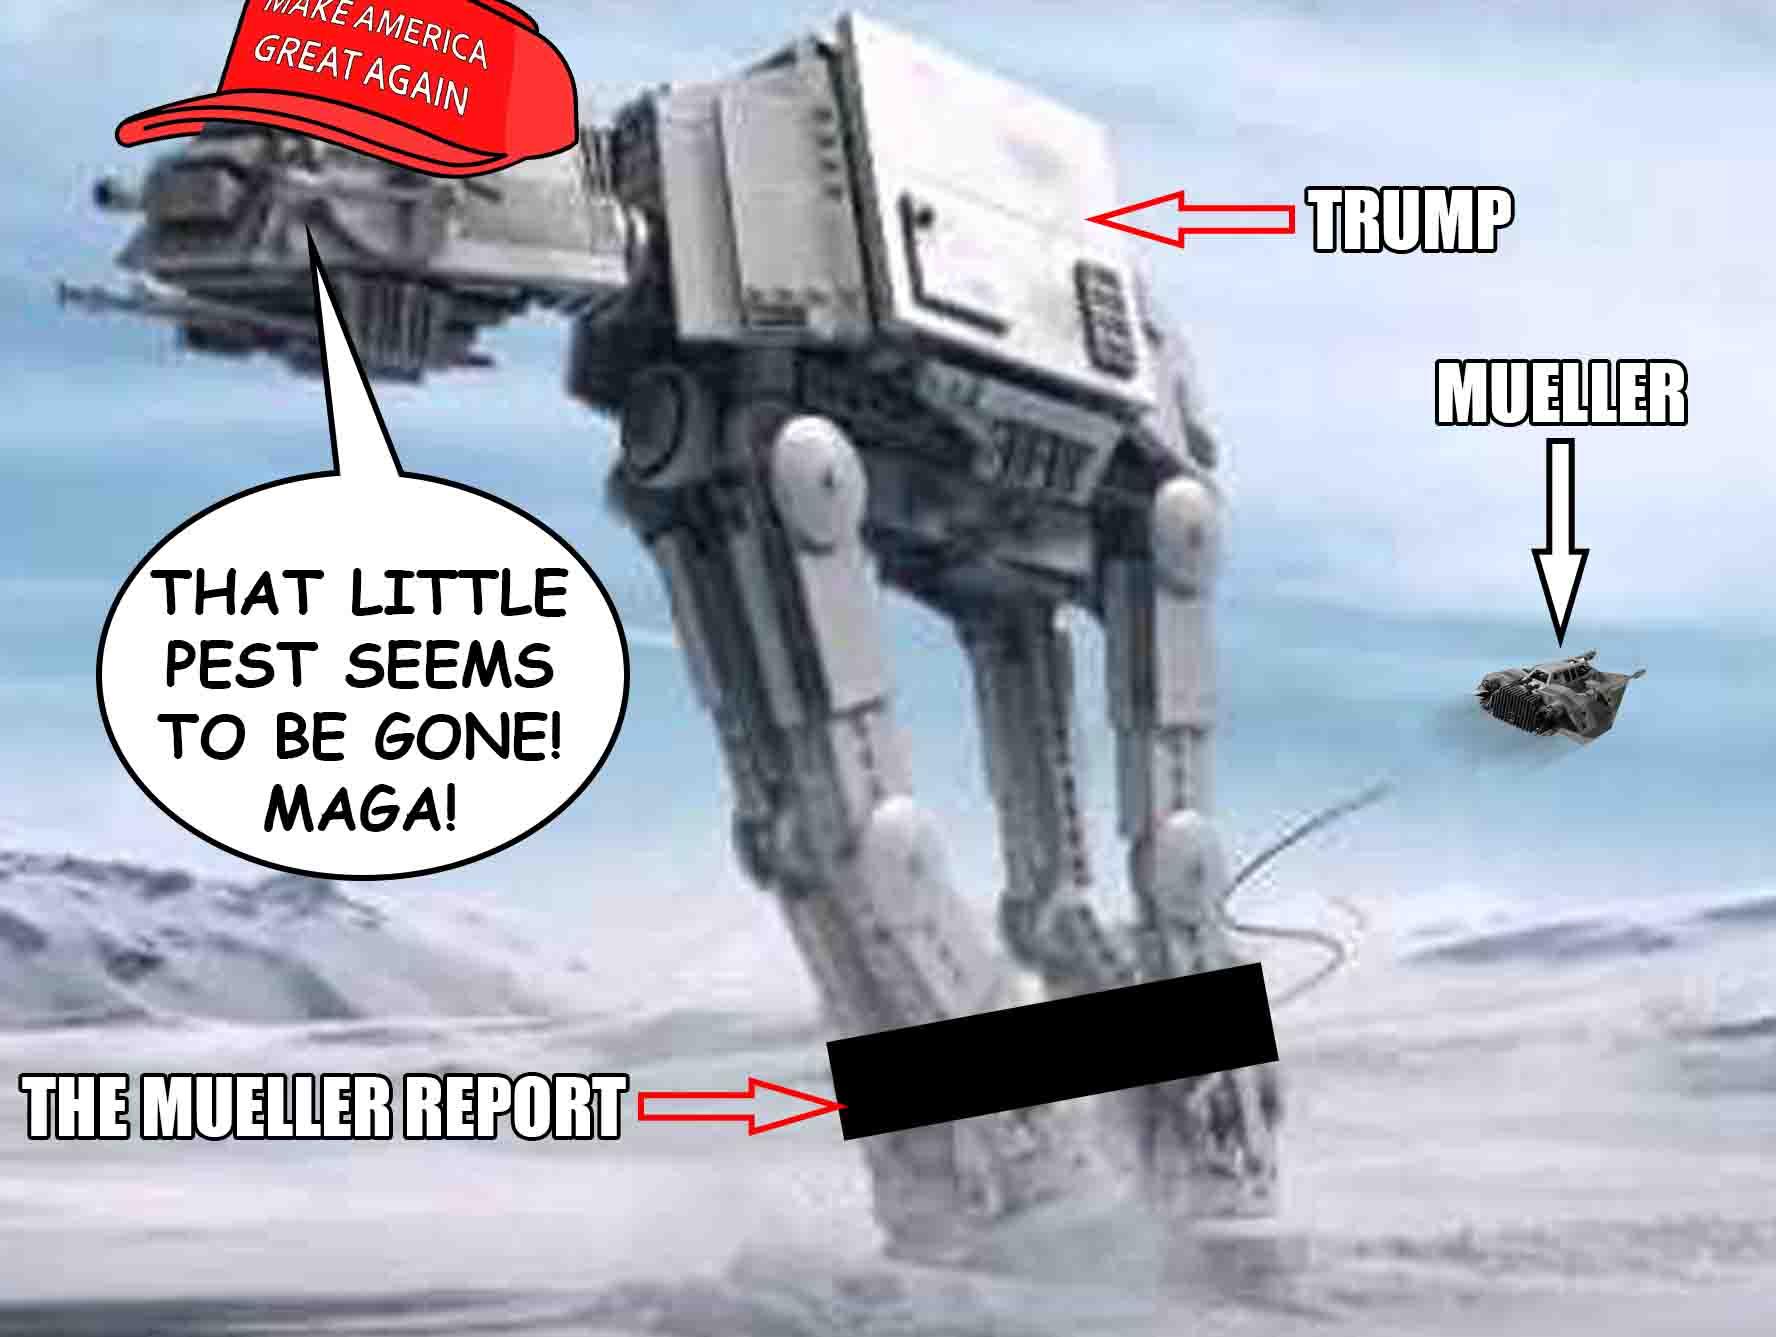 machine - Wake America Great Again V Trump Mueller That Little Pest Seems To Be Gone! Maga! The Mueller Report